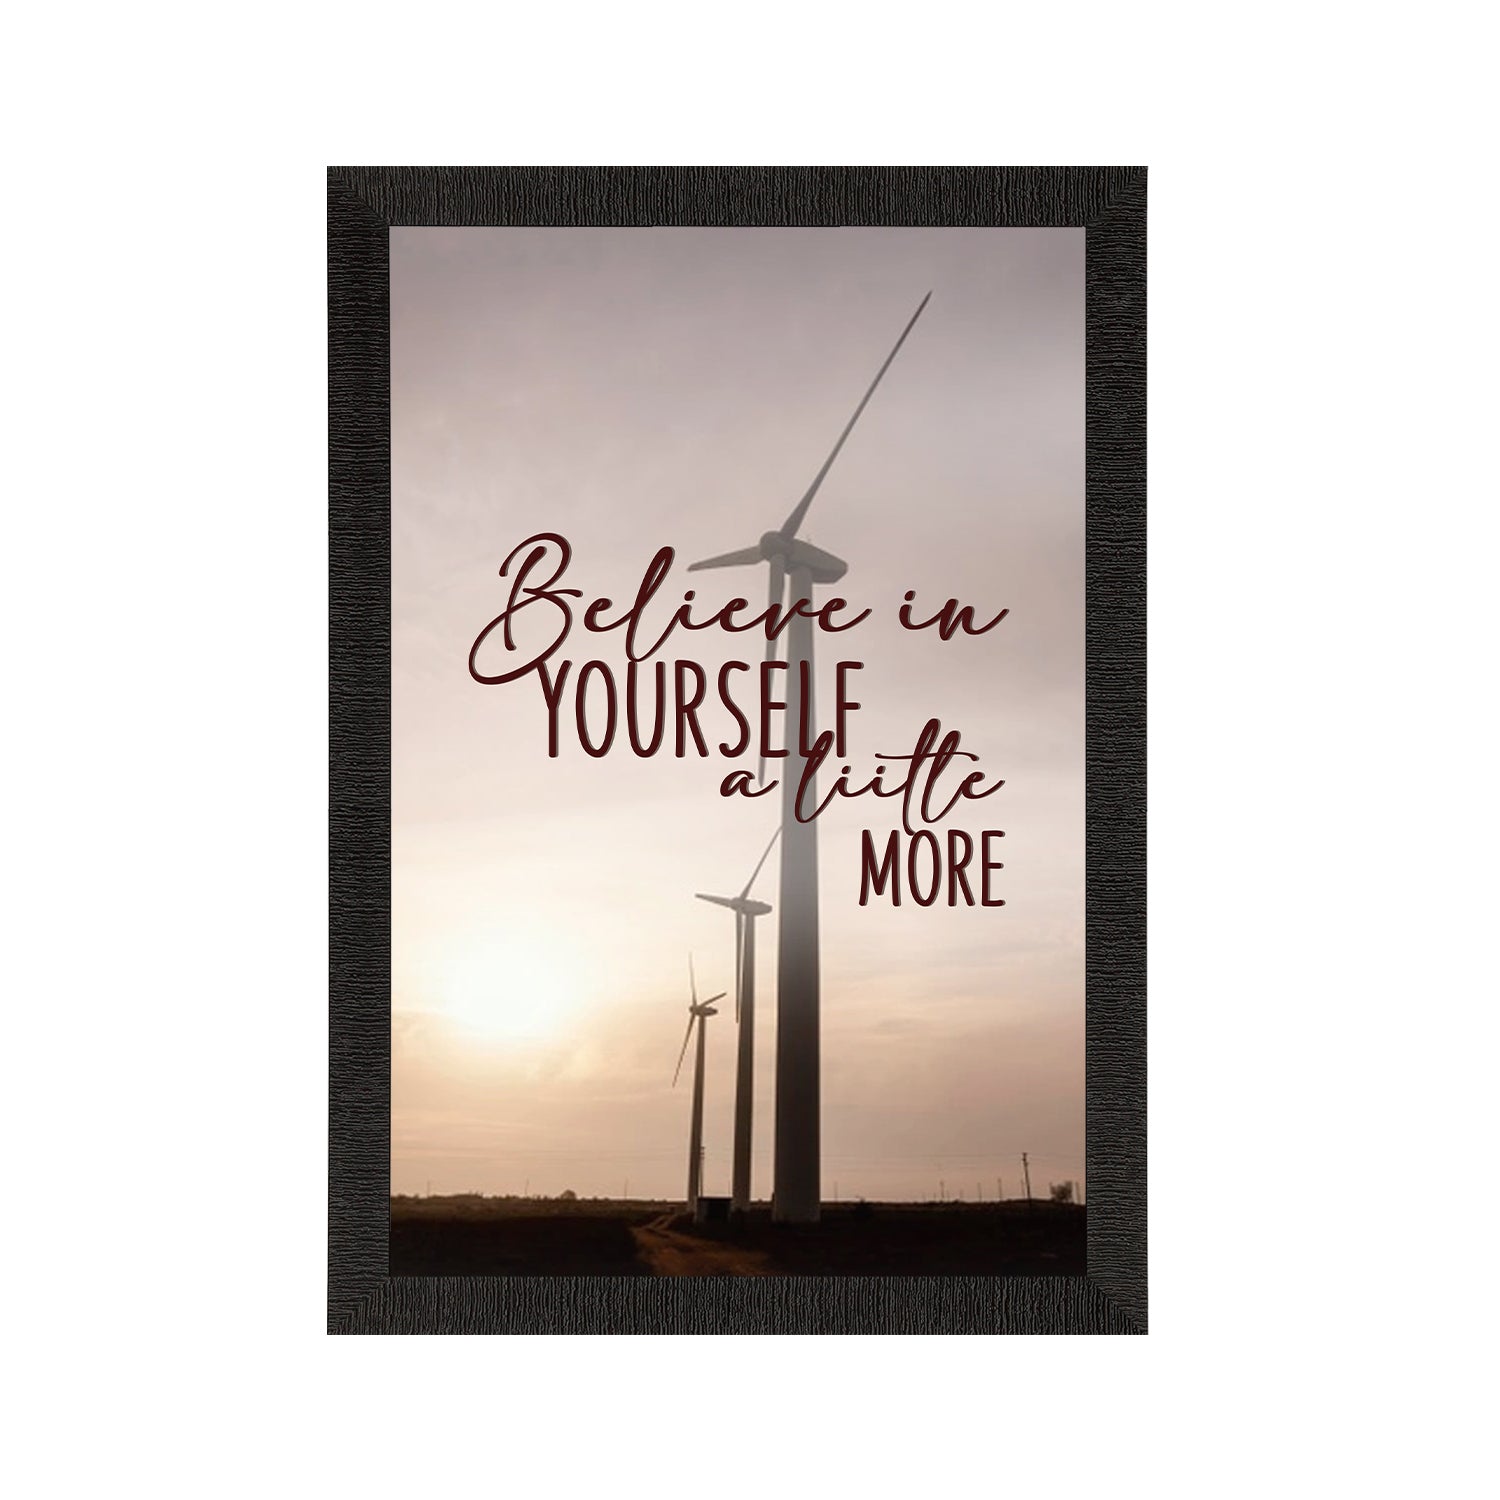 "Believe in yourself a little more" Motivational Quote Satin Matt Texture UV Art Painting